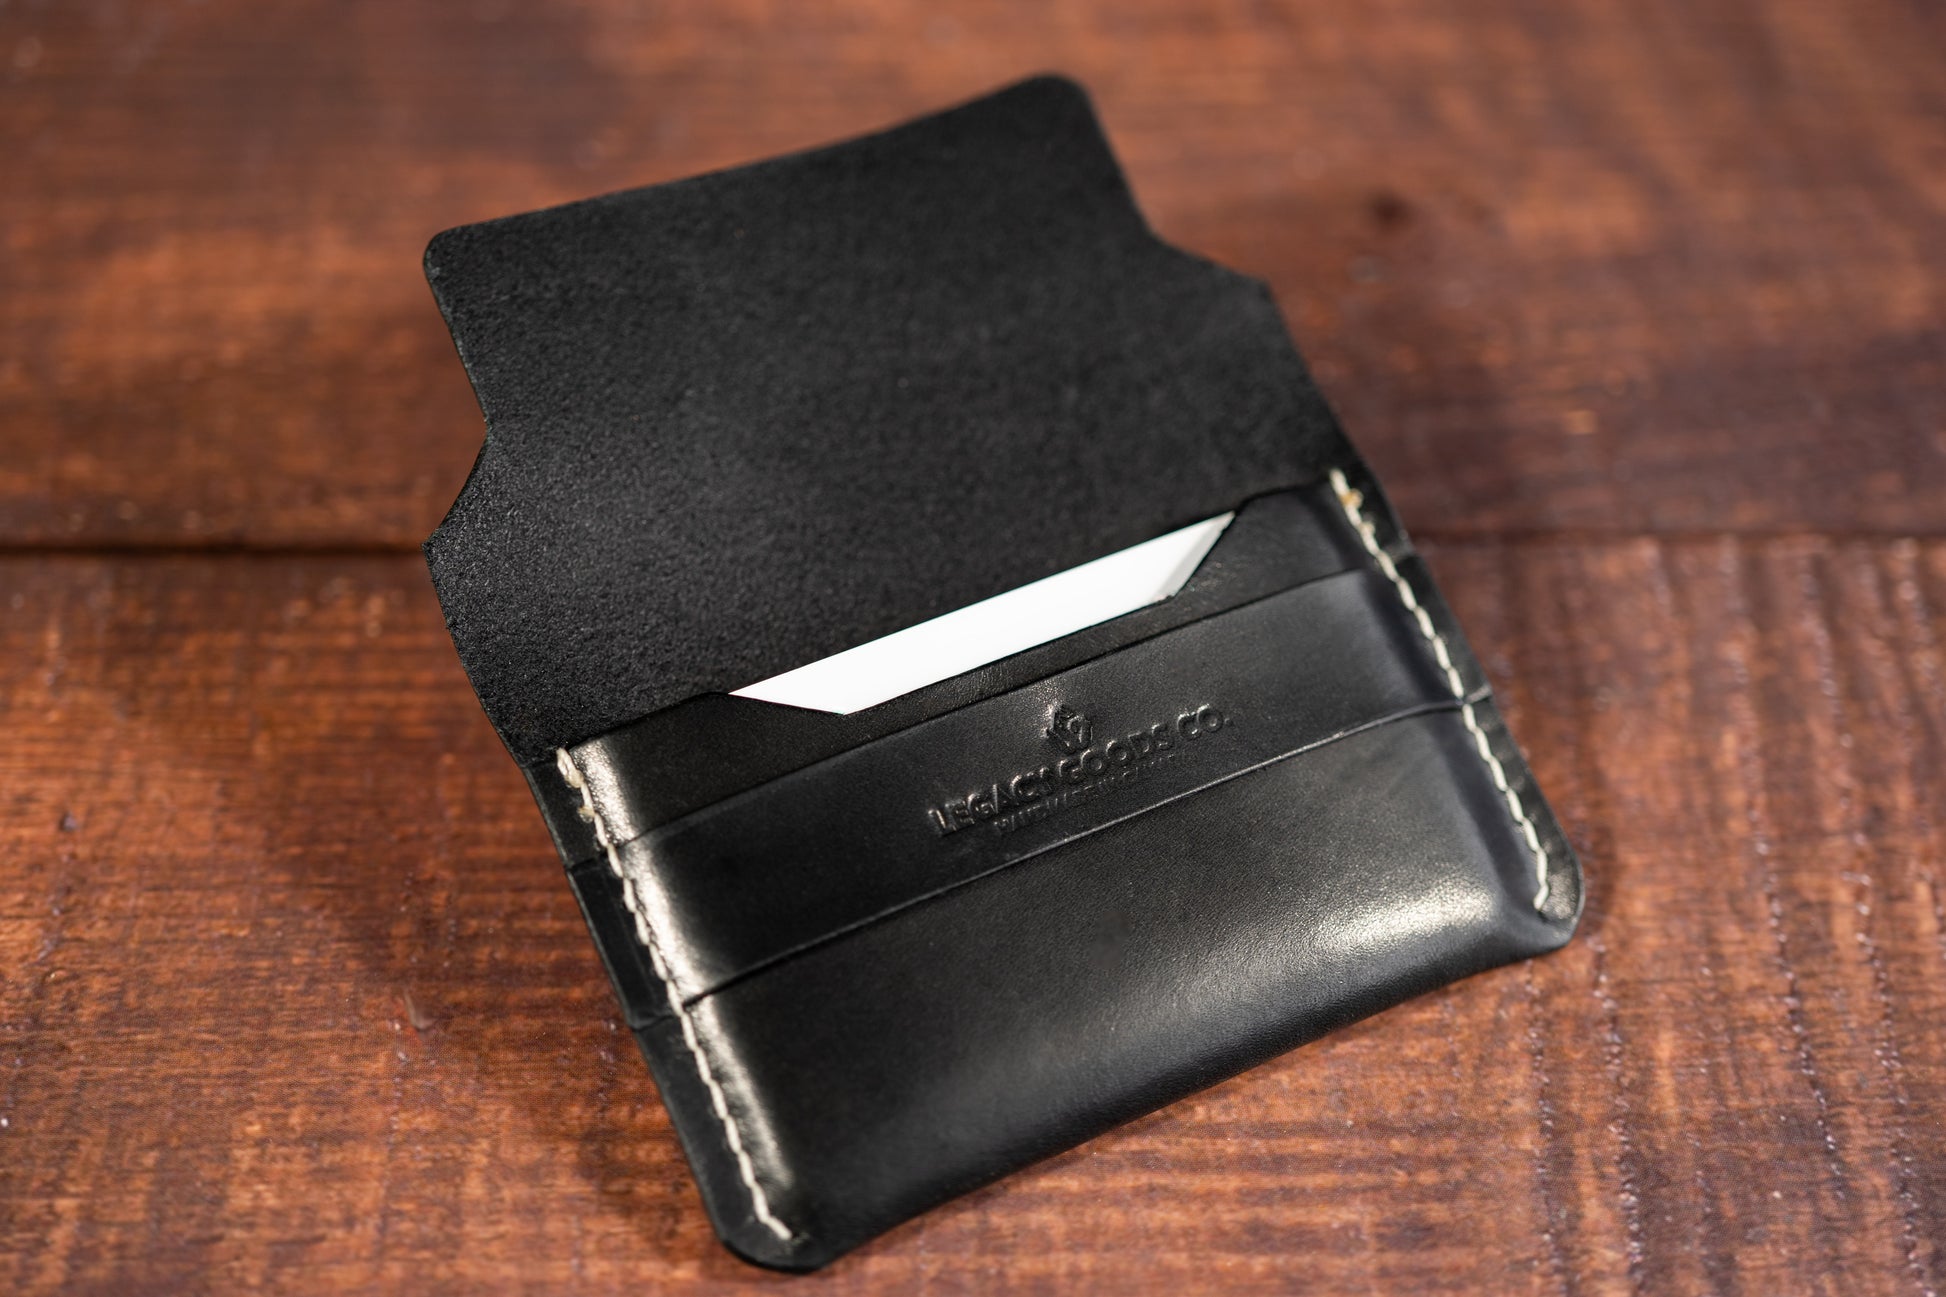 Legacy Goods' eco-friendly C2 Wallet